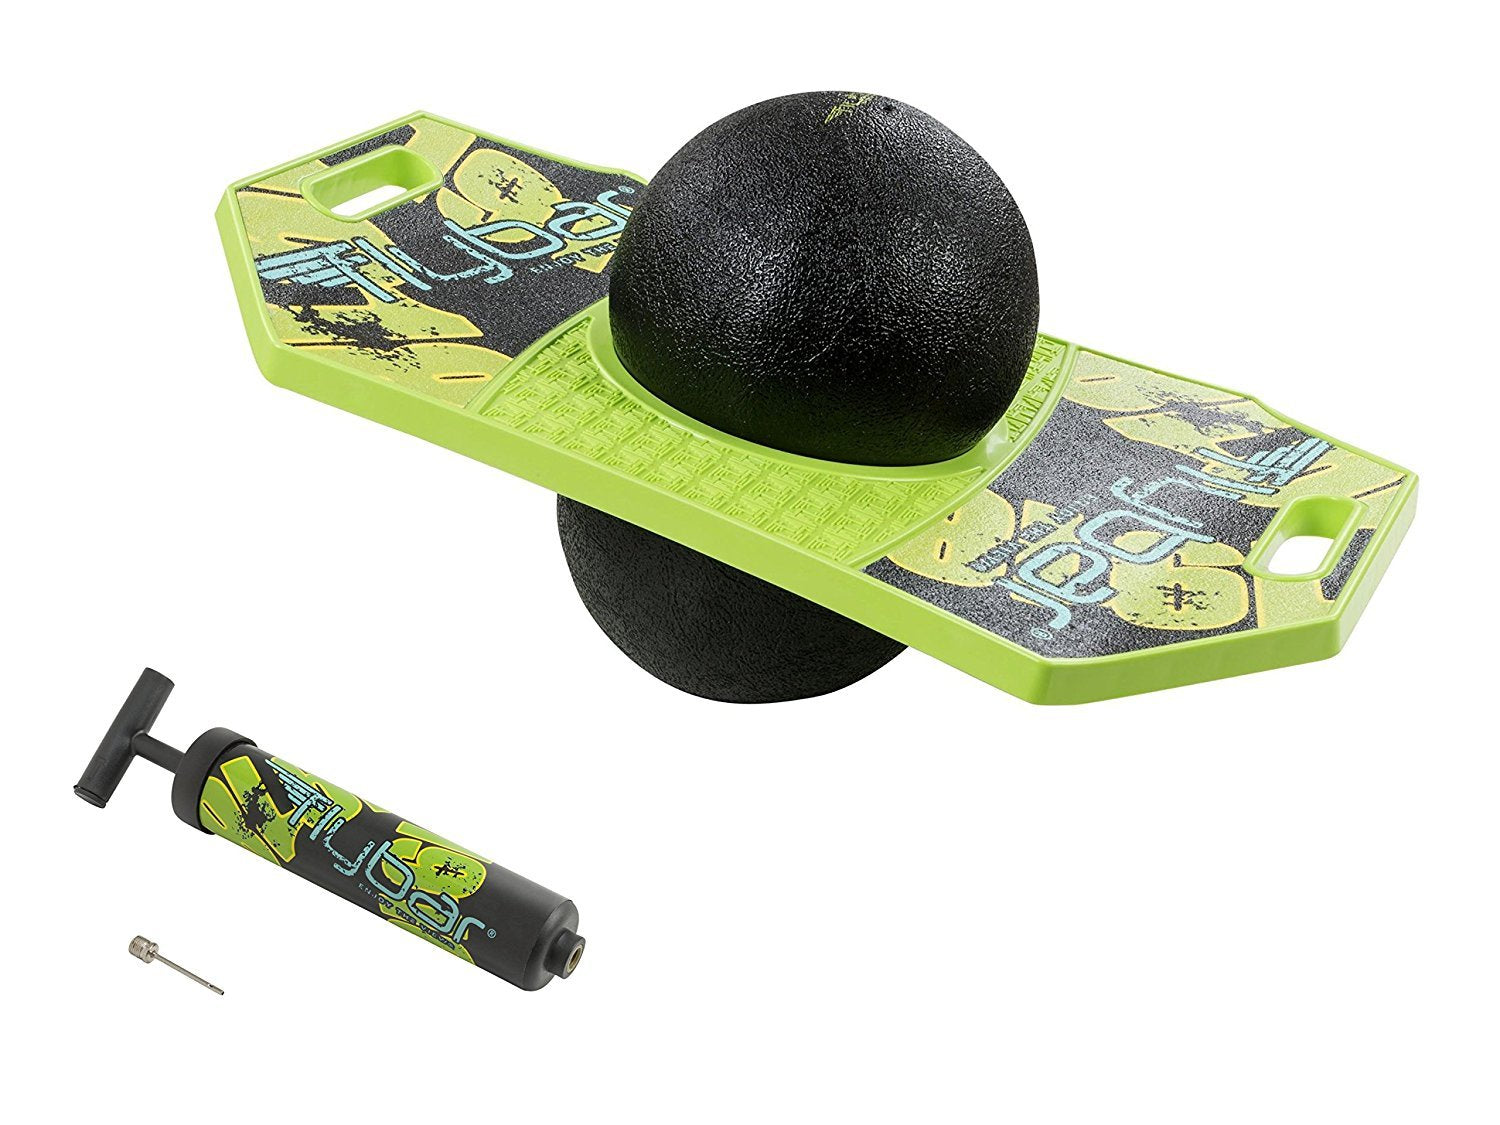 Flybar Pogo Ball Trick Board With Grip Tape For Kids Ages 6 & Up - Multiple Colors Available